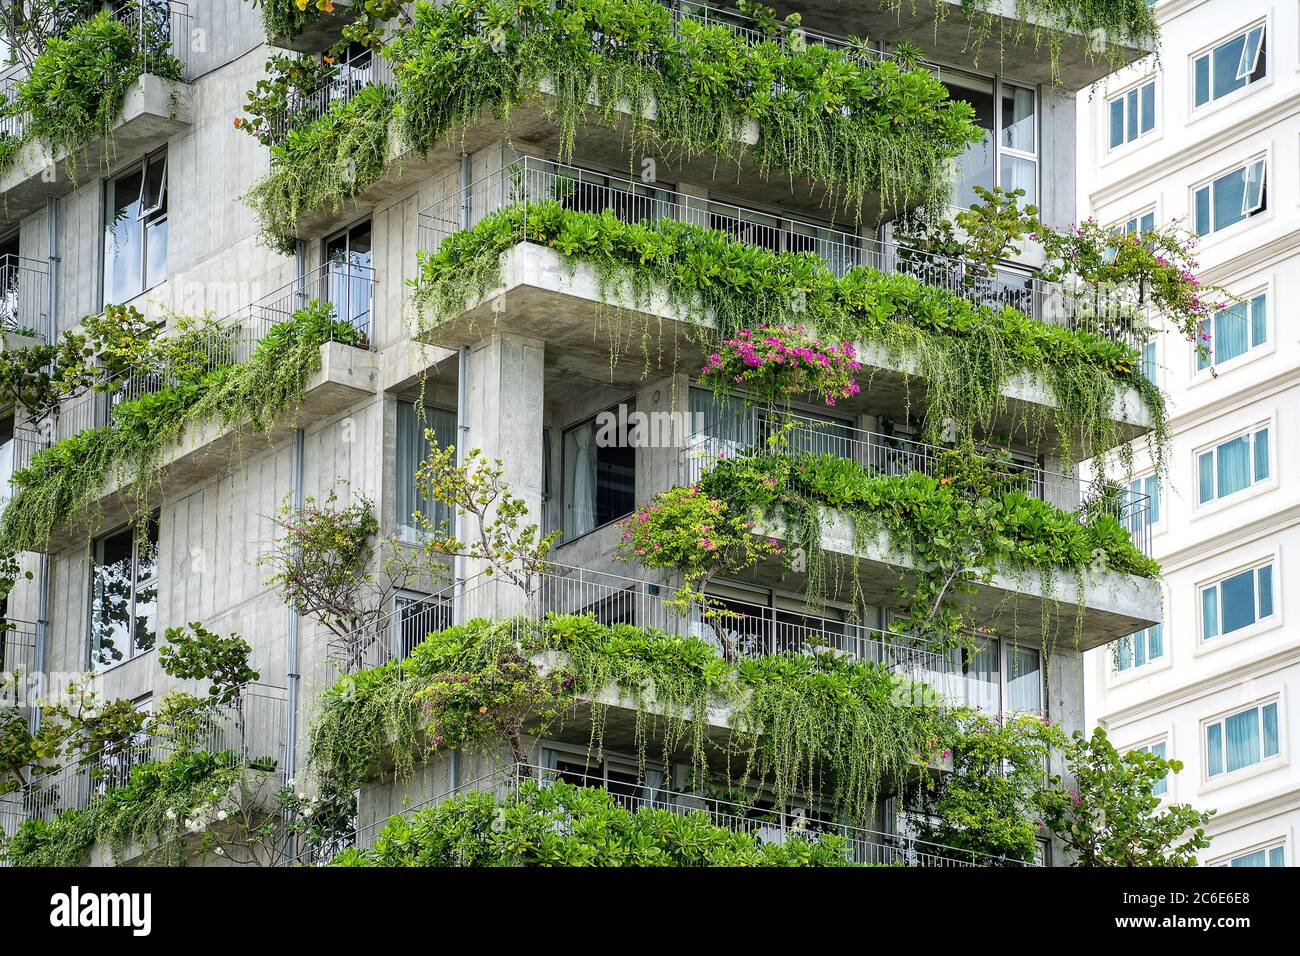 Ecological buildings facade with green plants and flowers on the stone wall of the facade of the house on the street of Danang city in Vietnam Stock Photo